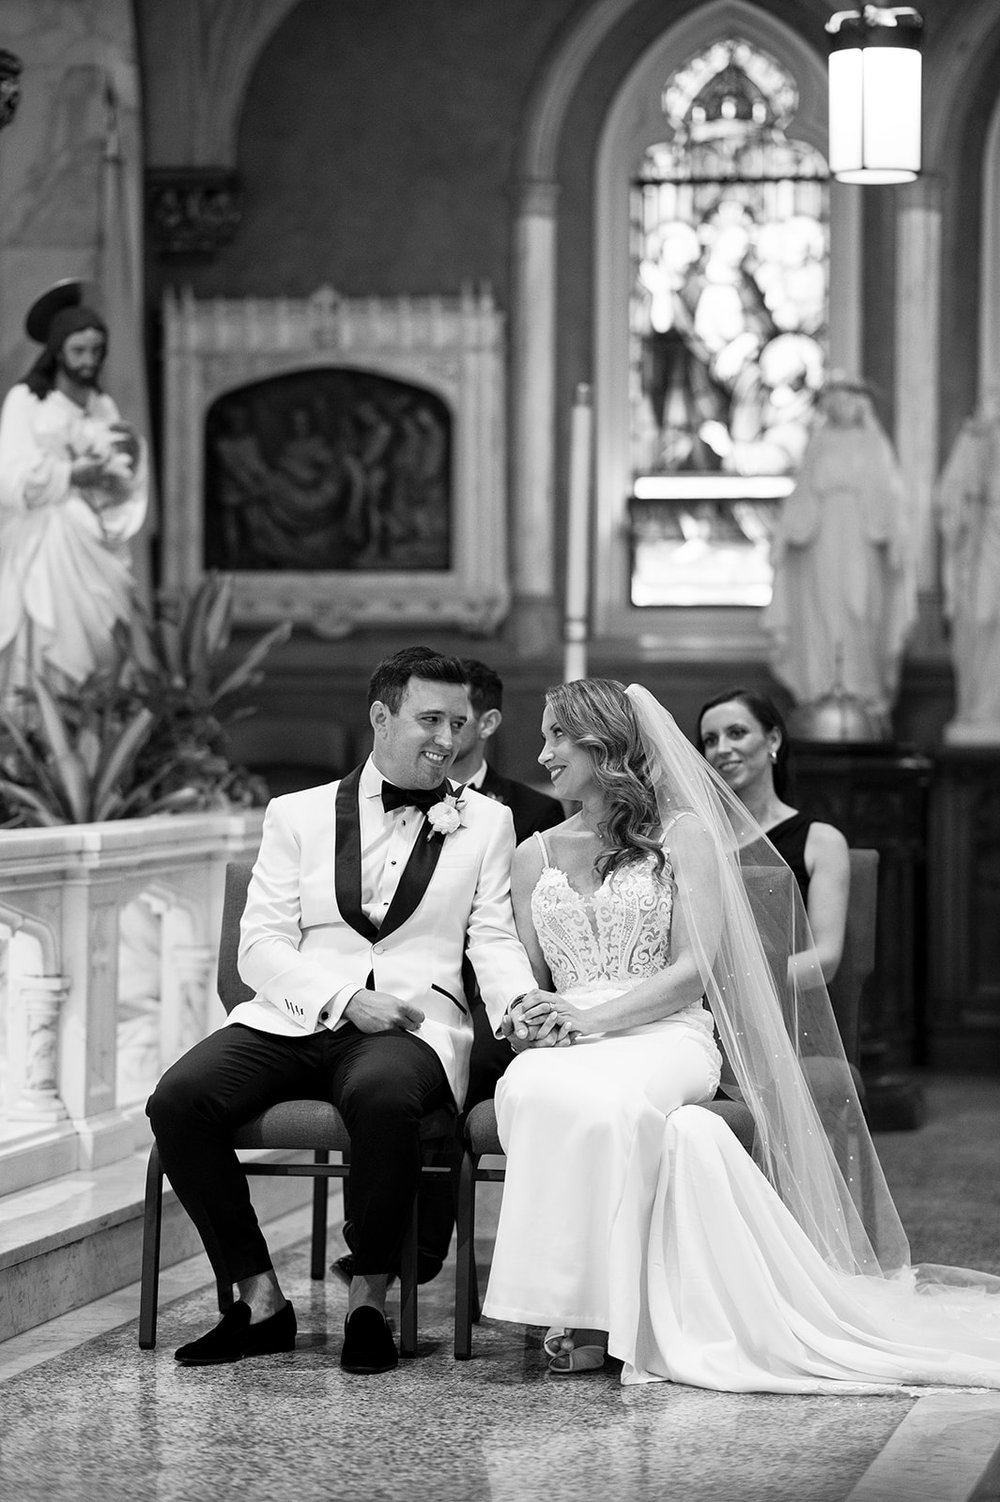  wedding ceremony photos in church with bride and groom 